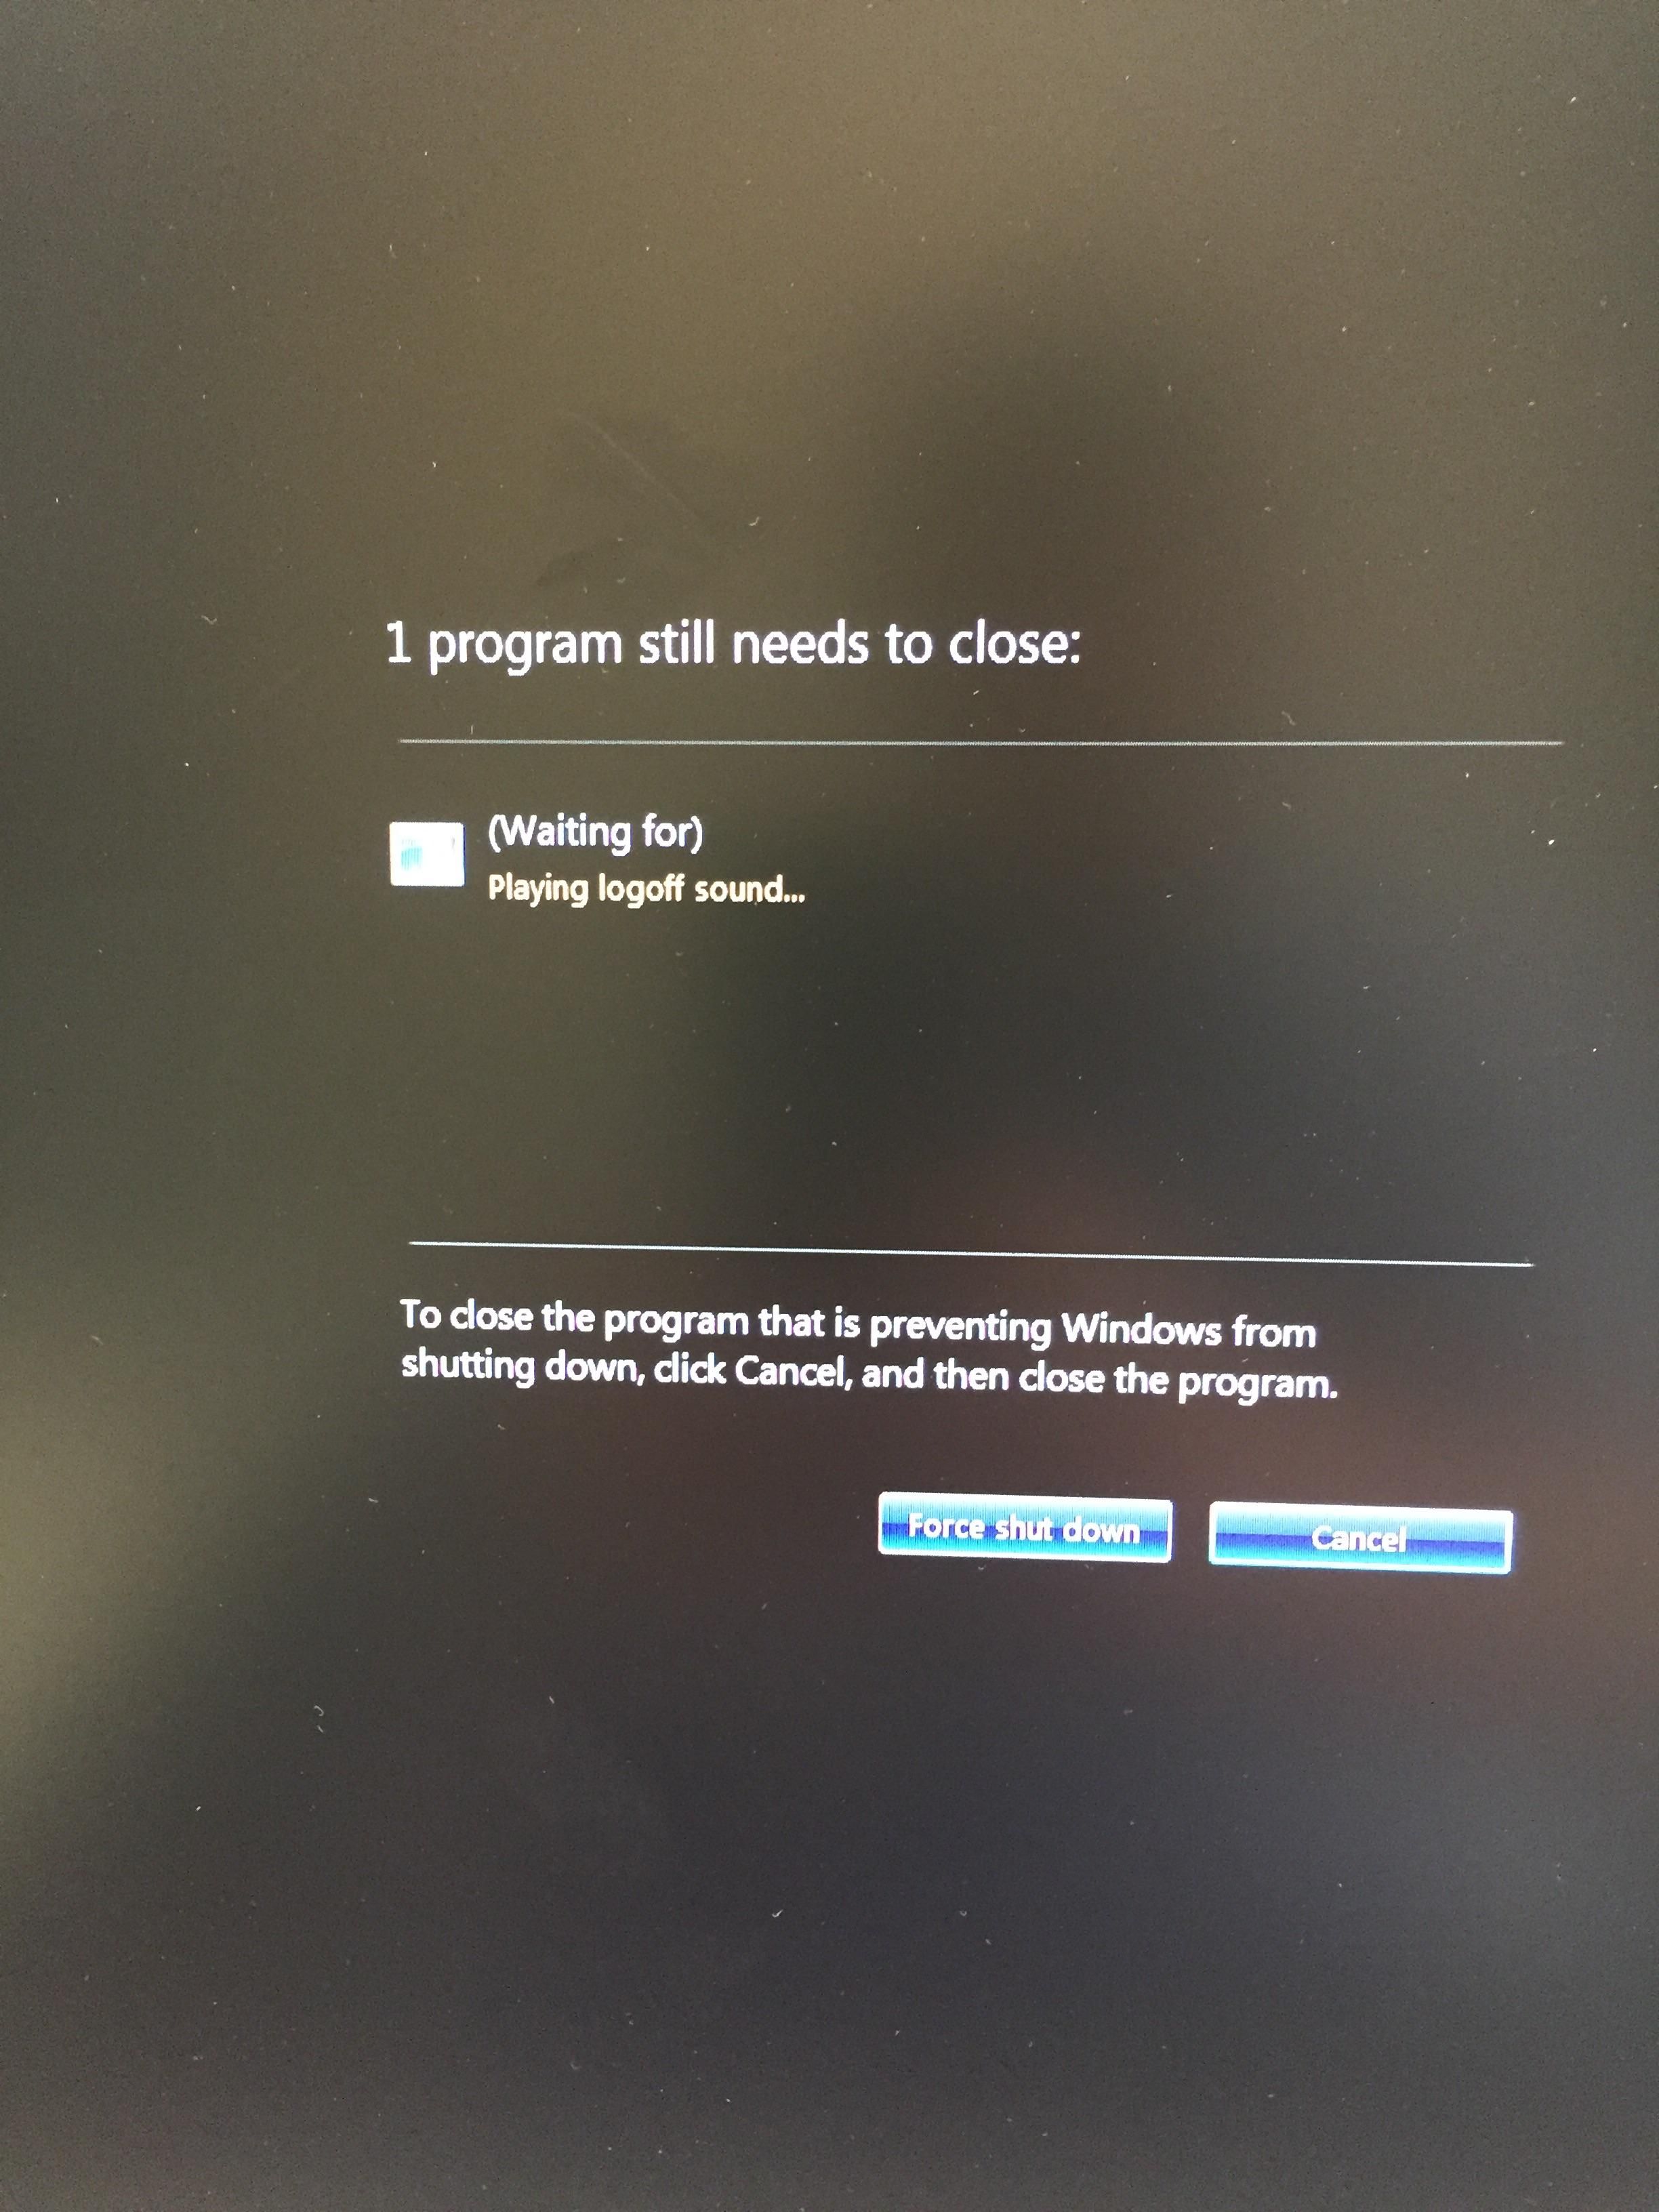 Seriously Windows, it's been like 5 minutes.